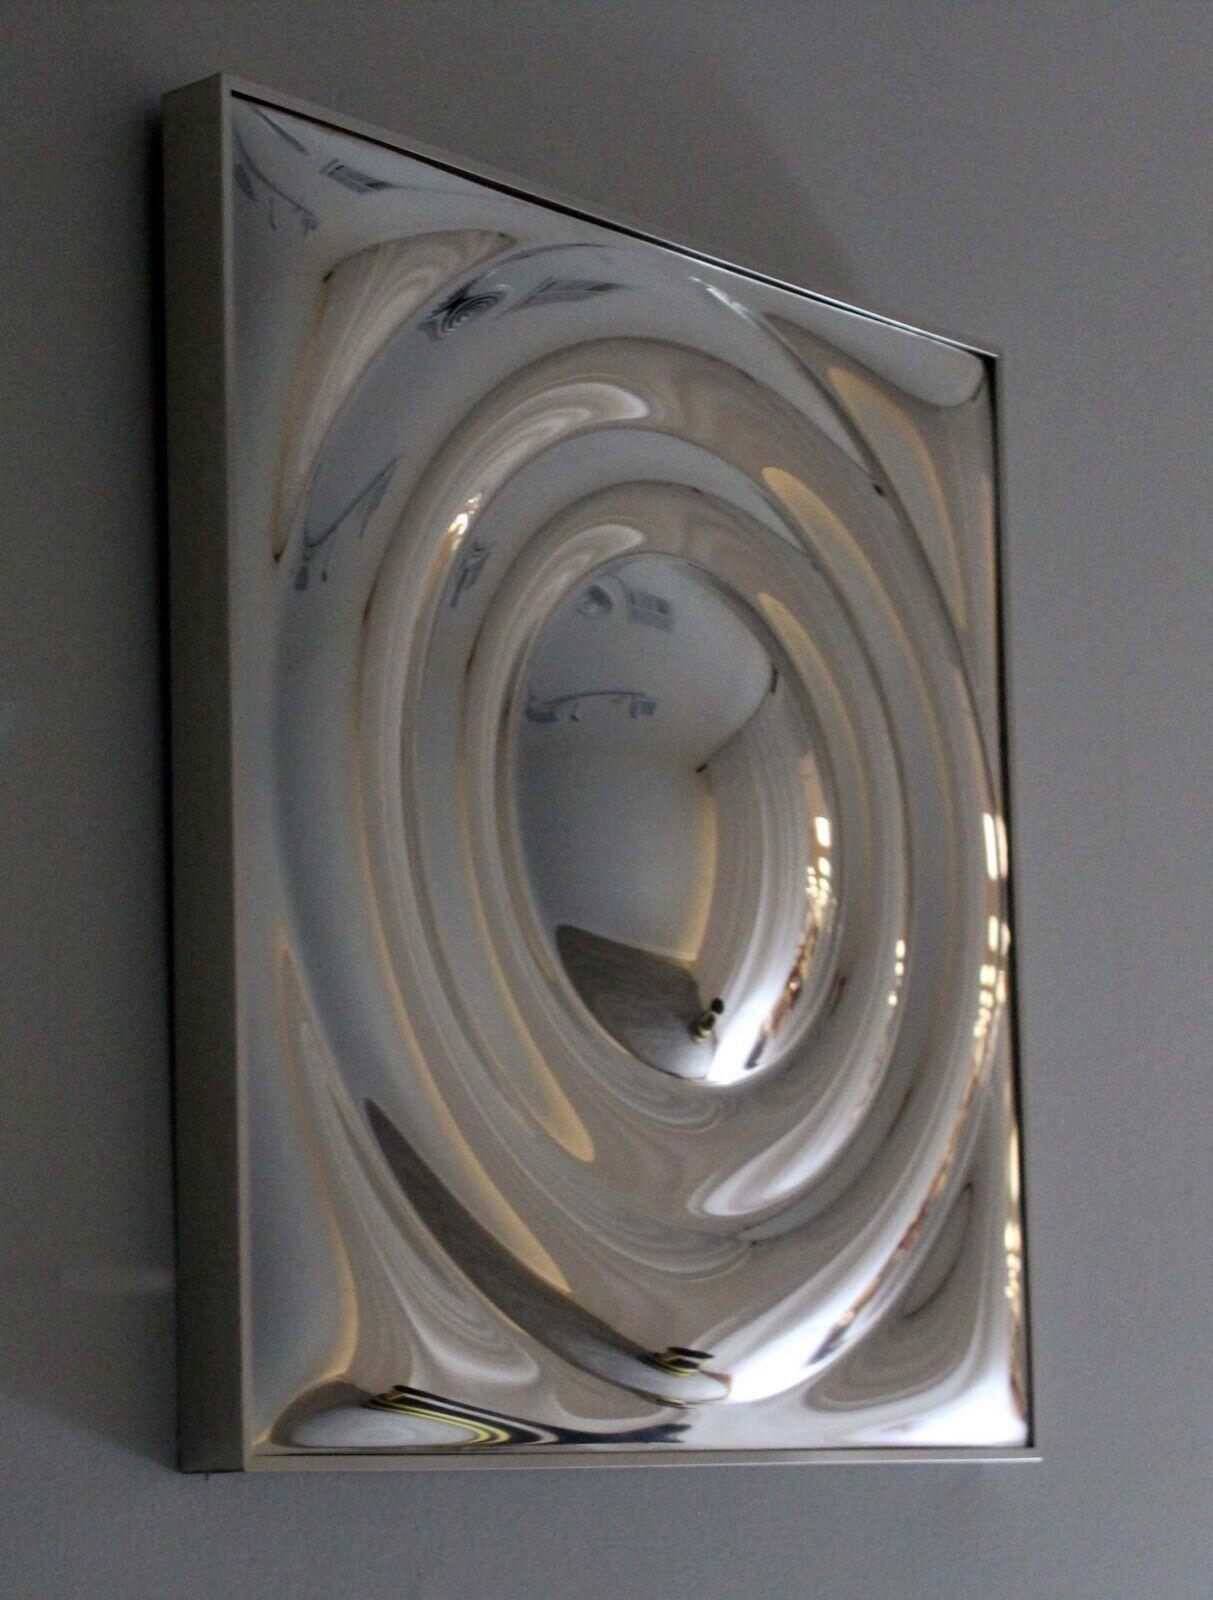 Vintage Mid-Century Modern turner saturn ring bubble mirror. Iconic Mid-Century Modern. Turner manufacturing co 1970’s Chicago. This piece has a few scratches but overall in great condition for a 50 year old item.

Dimensions: 24W X 2.5D X 24H.